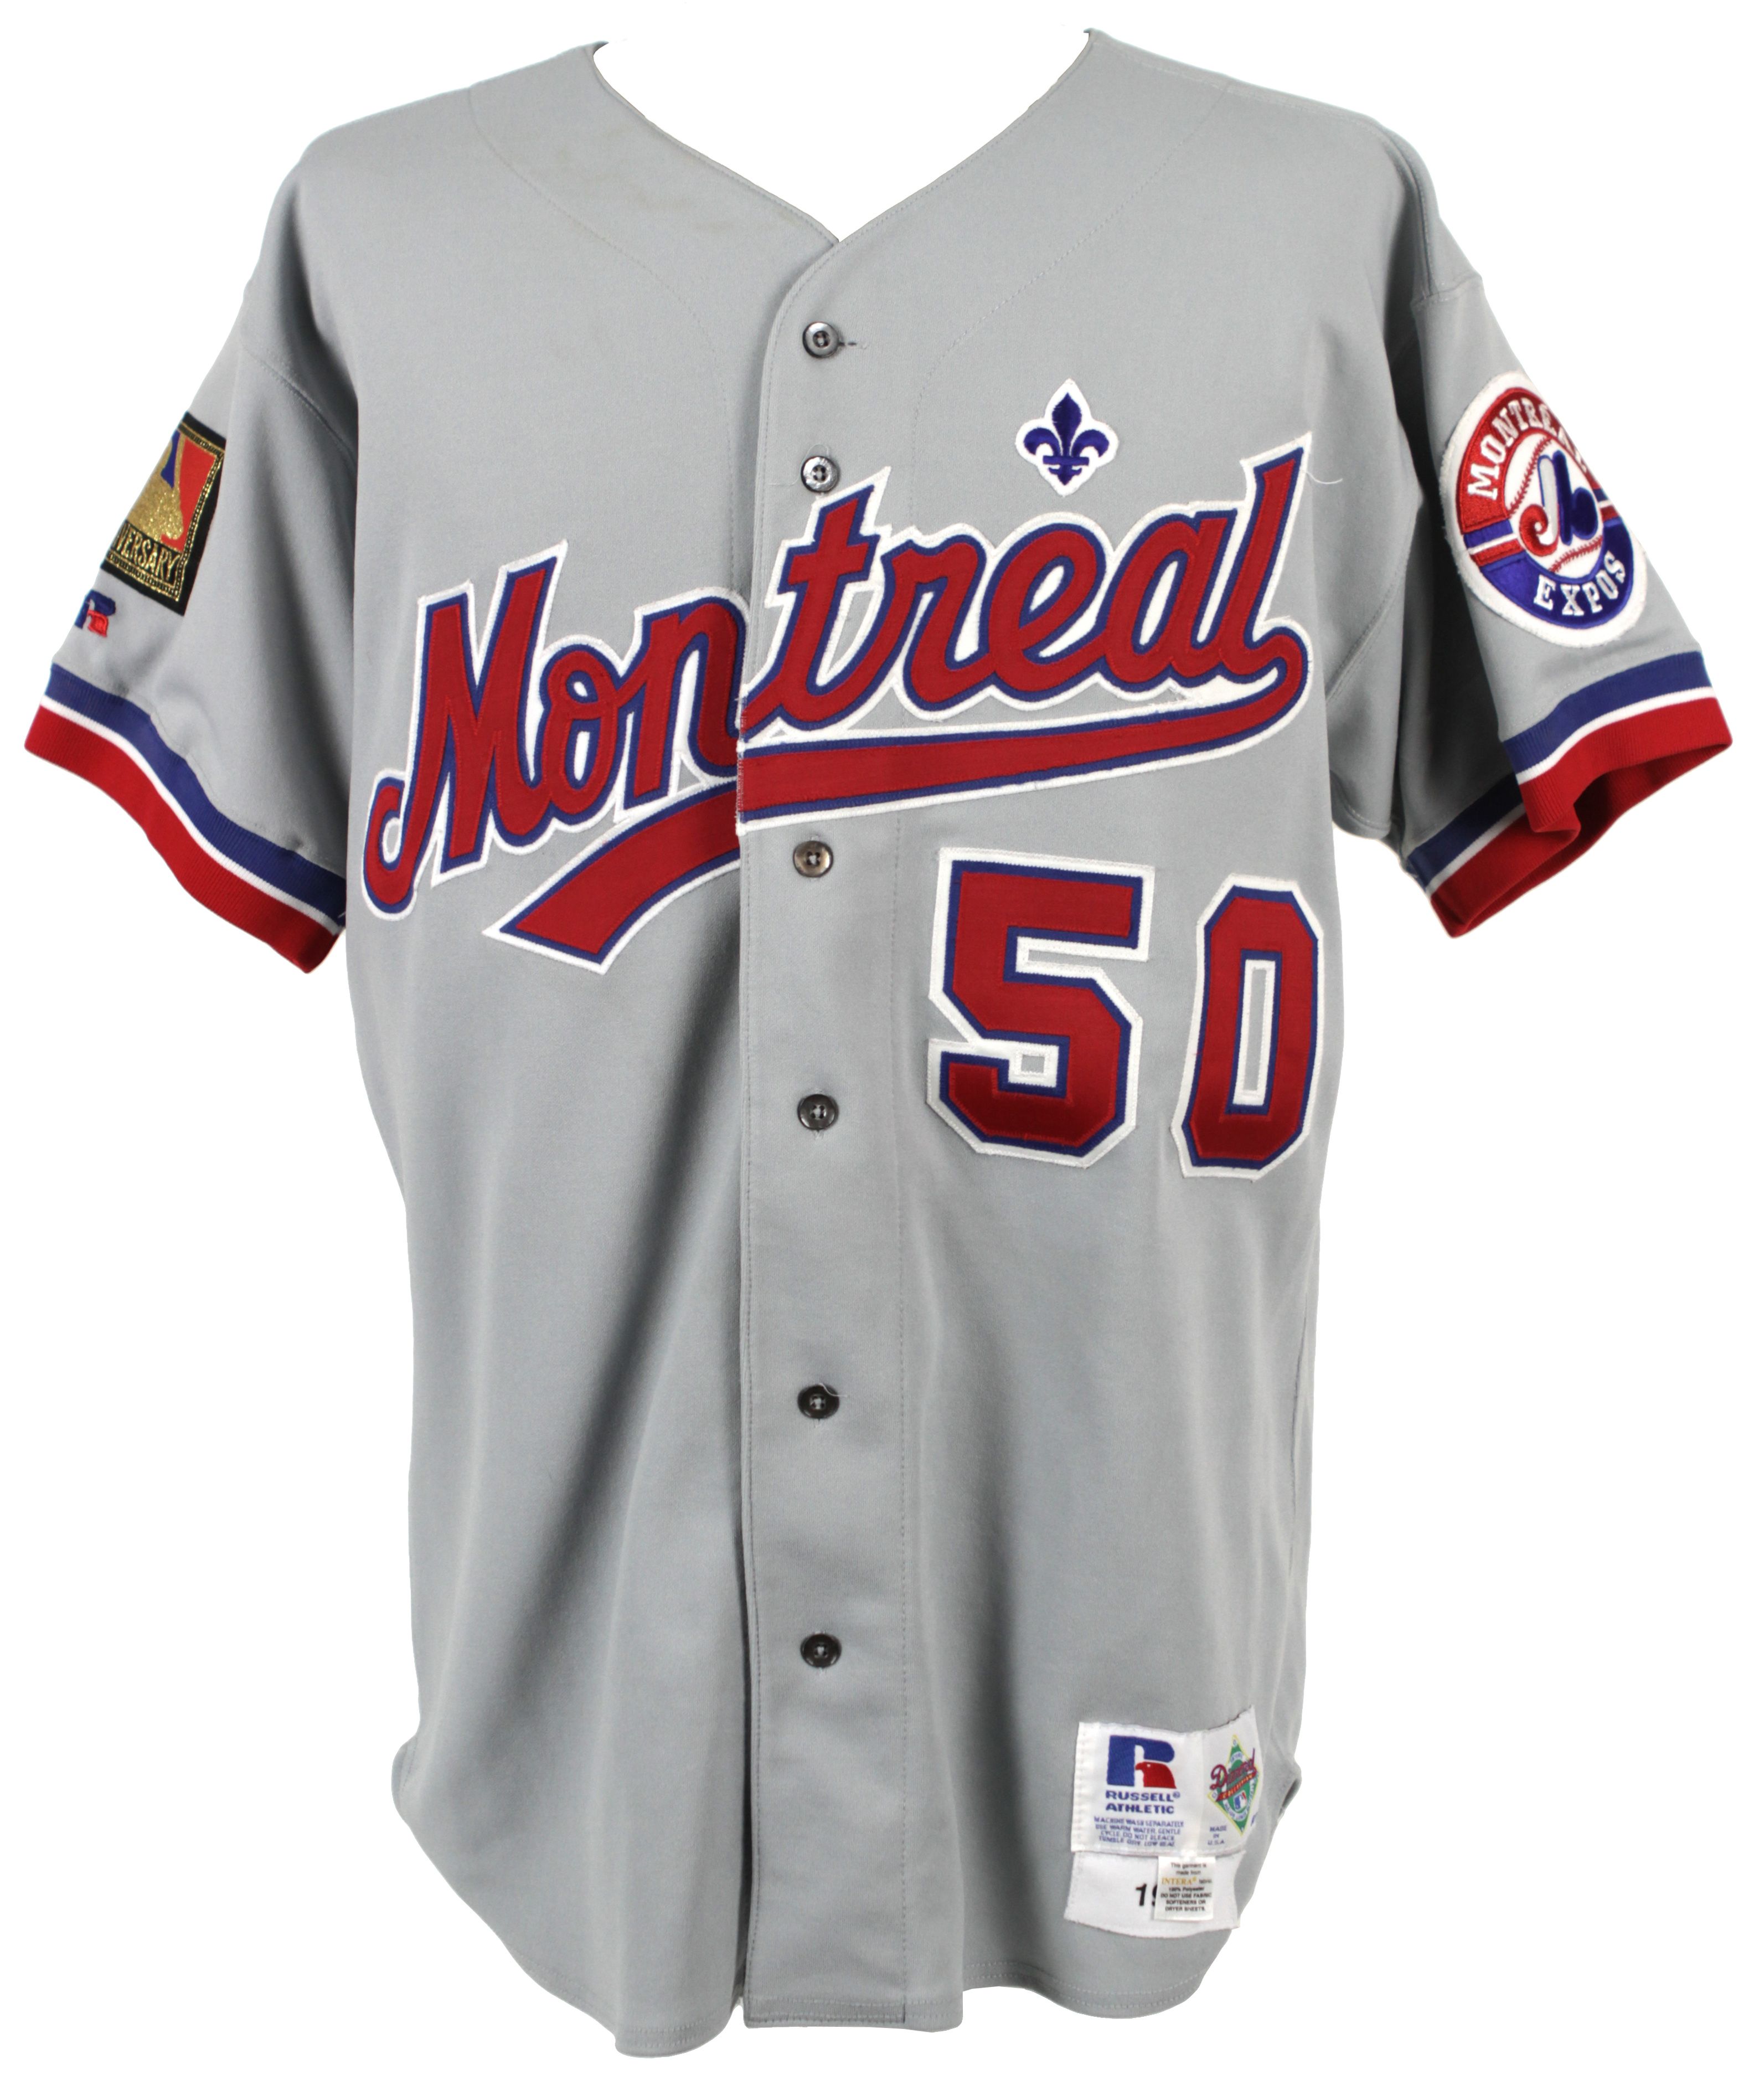 Sold at Auction: Tommy John's Expos Jacket